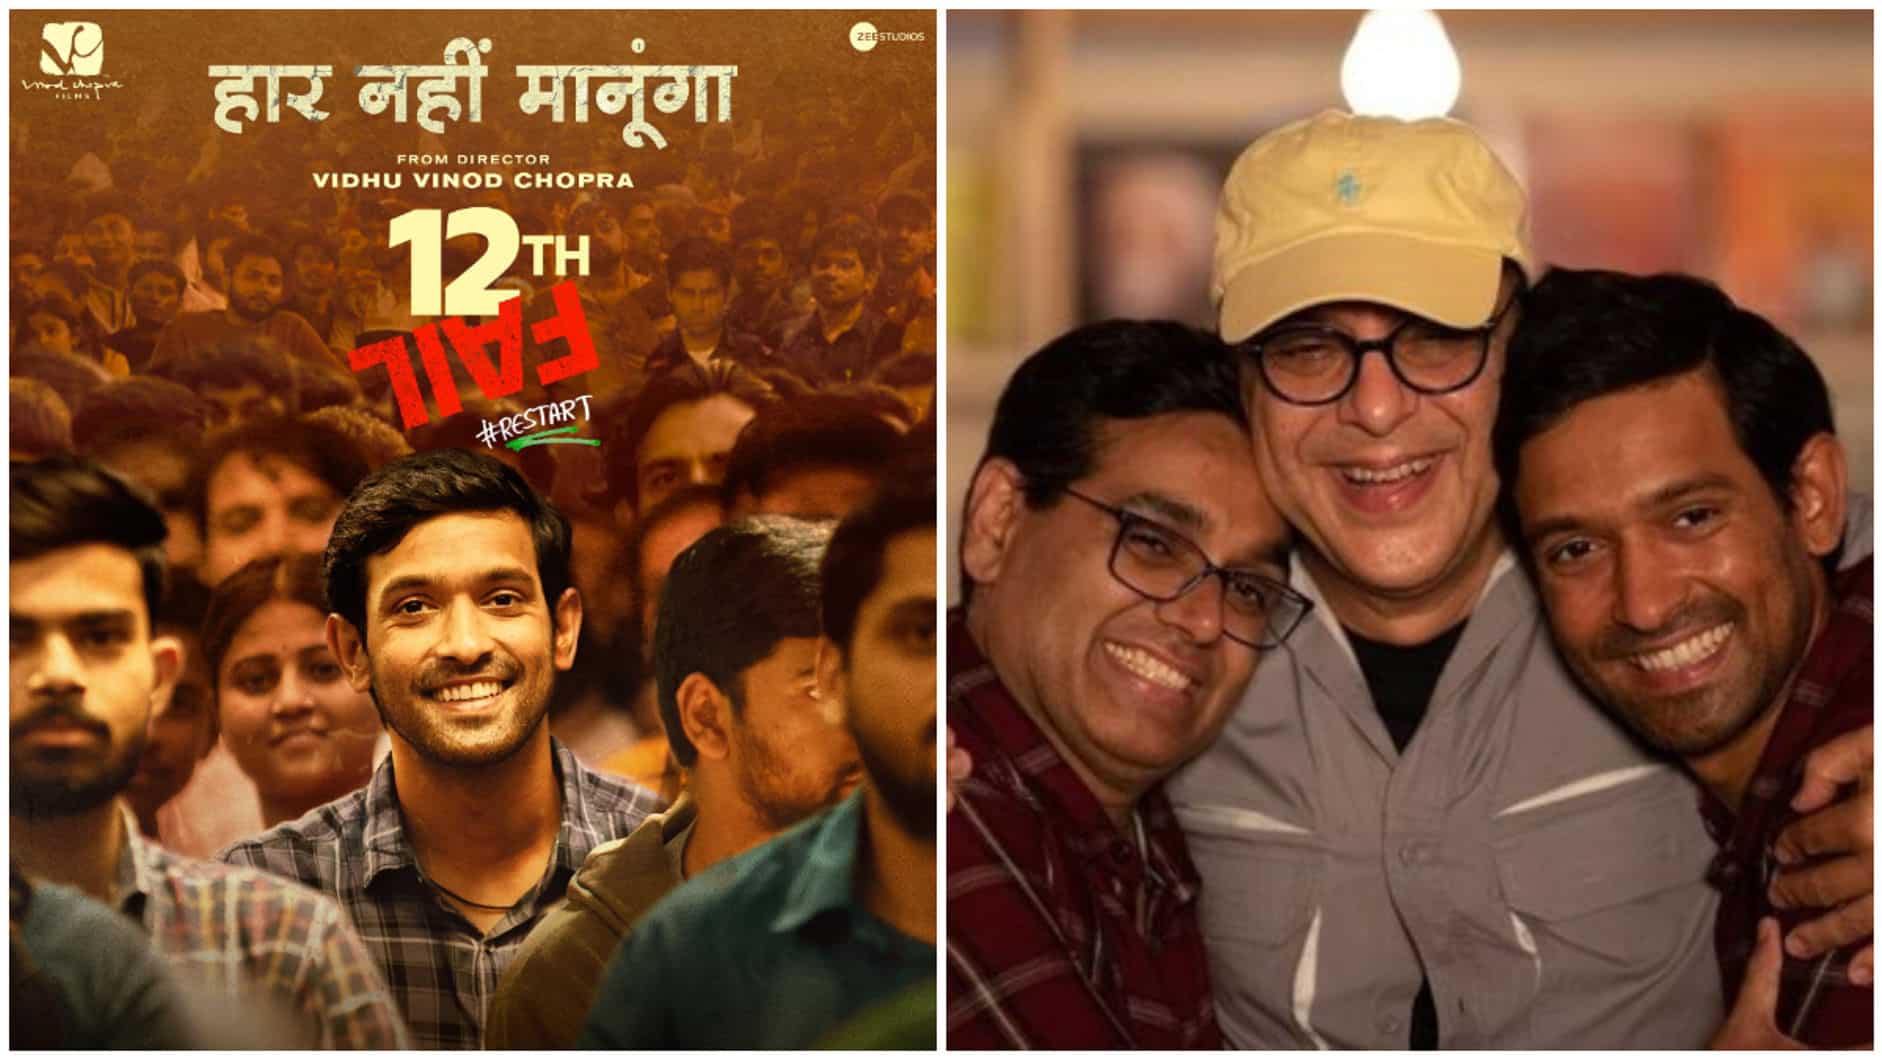 https://www.mobilemasala.com/film-gossip/Vidhu-Vinod-Chopra-stormed-into-neighbouring-set-to-complain-about-noise-pollution-during-12th-Fail-shoot-know-what-happened-next-i212145